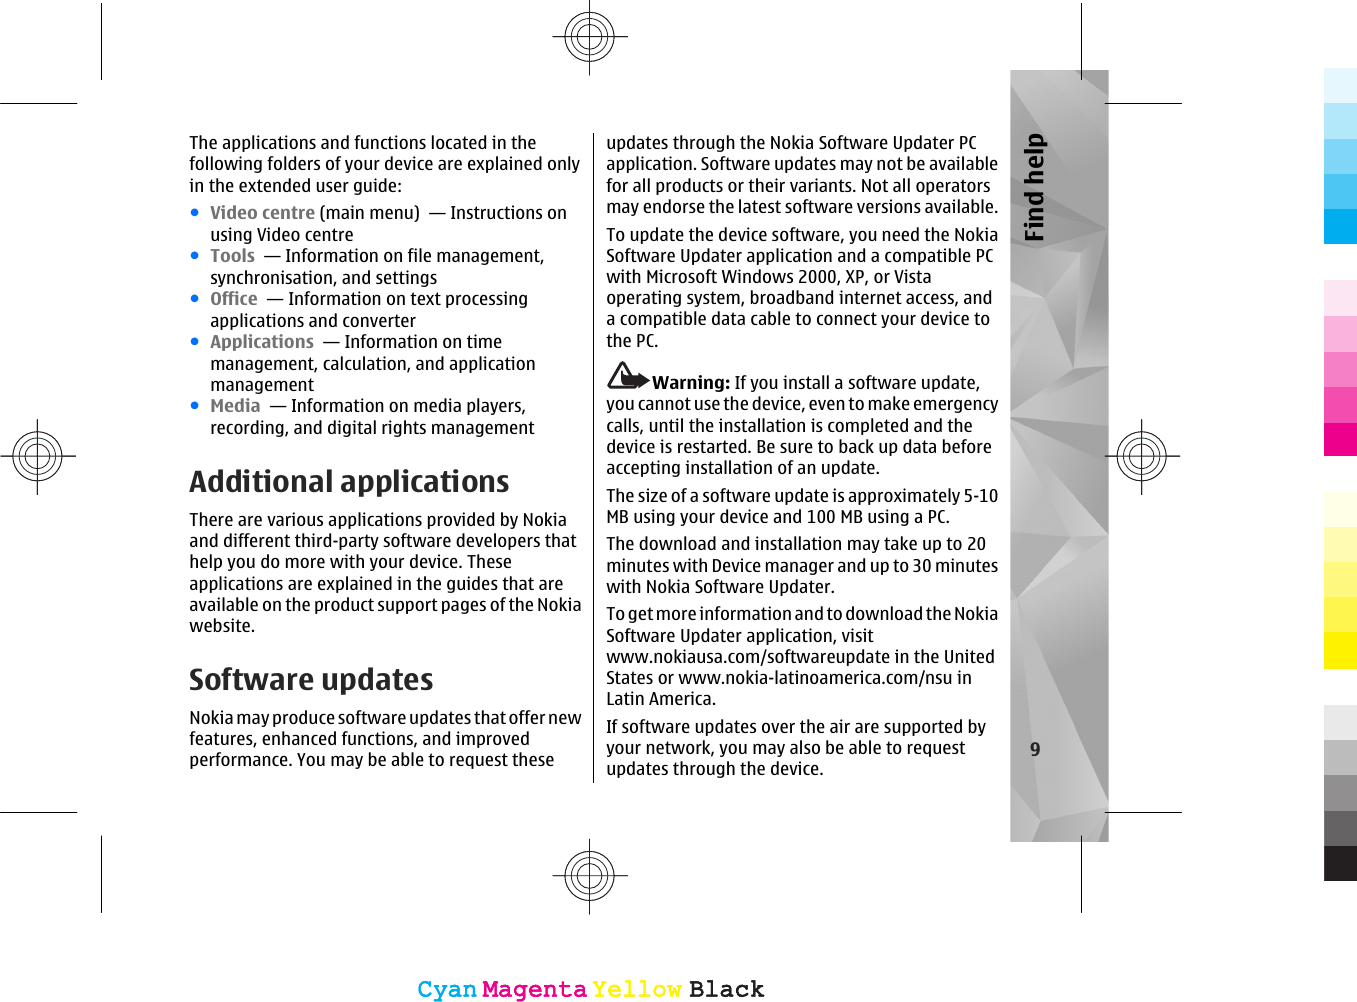 The applications and functions located in thefollowing folders of your device are explained onlyin the extended user guide:●Video centre (main menu)  — Instructions onusing Video centre●Tools  — Information on file management,synchronisation, and settings●Office  — Information on text processingapplications and converter●Applications  — Information on timemanagement, calculation, and applicationmanagement●Media  — Information on media players,recording, and digital rights managementAdditional applicationsThere are various applications provided by Nokiaand different third-party software developers thathelp you do more with your device. Theseapplications are explained in the guides that areavailable on the product support pages of the Nokiawebsite.Software updatesNokia may produce software updates that offer newfeatures, enhanced functions, and improvedperformance. You may be able to request theseupdates through the Nokia Software Updater PCapplication. Software updates may not be availablefor all products or their variants. Not all operatorsmay endorse the latest software versions available.To update the device software, you need the NokiaSoftware Updater application and a compatible PCwith Microsoft Windows 2000, XP, or Vistaoperating system, broadband internet access, anda compatible data cable to connect your device tothe PC.Warning: If you install a software update,you cannot use the device, even to make emergencycalls, until the installation is completed and thedevice is restarted. Be sure to back up data beforeaccepting installation of an update.The size of a software update is approximately 5-10MB using your device and 100 MB using a PC.The download and installation may take up to 20minutes with Device manager and up to 30 minuteswith Nokia Software Updater.To get more information and to download the NokiaSoftware Updater application, visitwww.nokiausa.com/softwareupdate in the UnitedStates or www.nokia-latinoamerica.com/nsu inLatin America.If software updates over the air are supported byyour network, you may also be able to requestupdates through the device.9Find helpCyanCyanMagentaMagentaYellowYellowBlackBlackCyanCyanMagentaMagentaYellowYellowBlackBlack